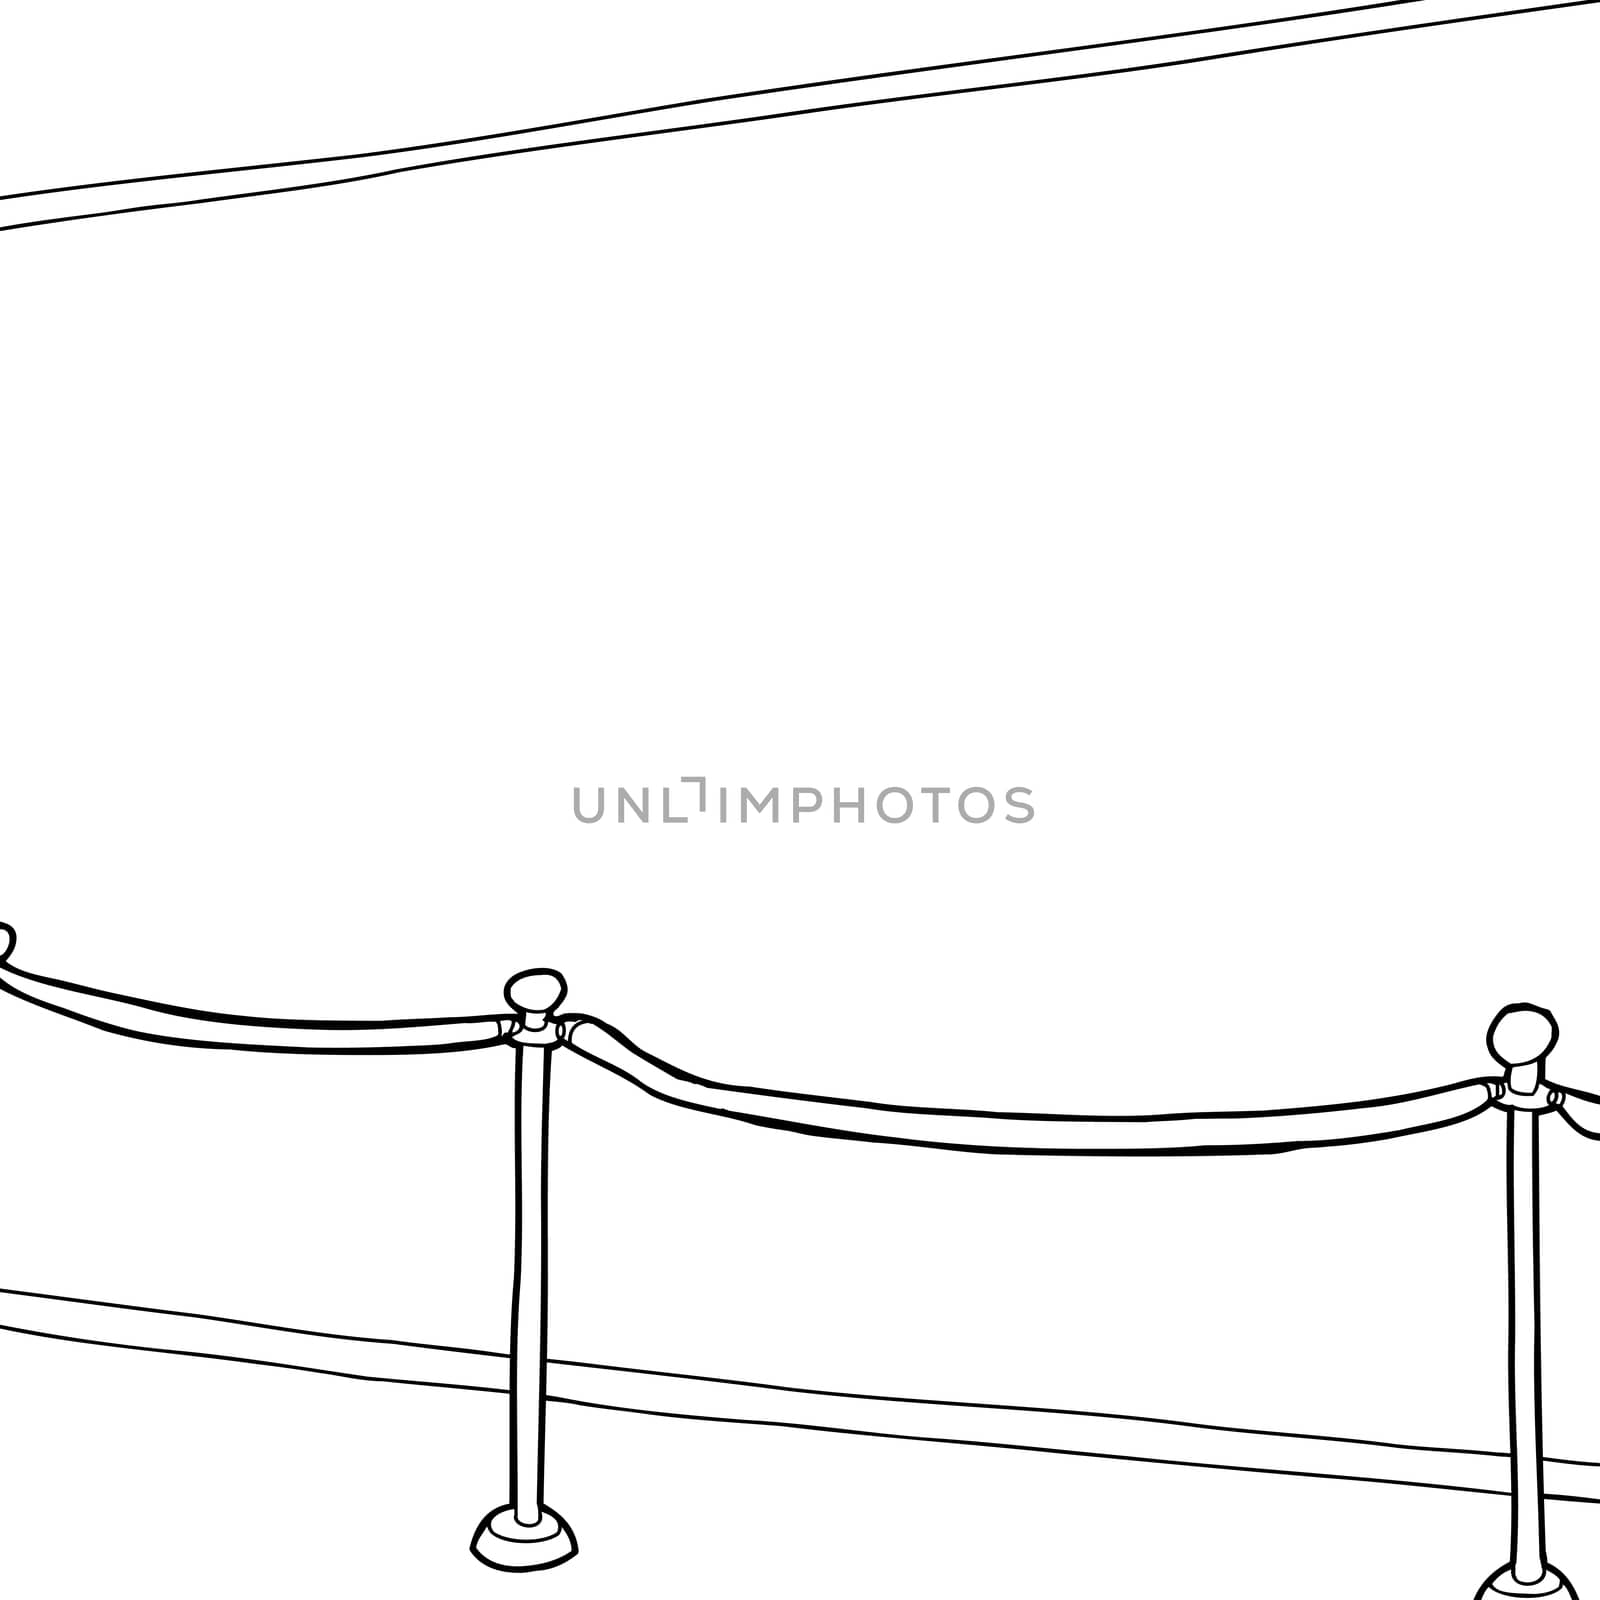 Outline cartoon of stanchion and blank wall